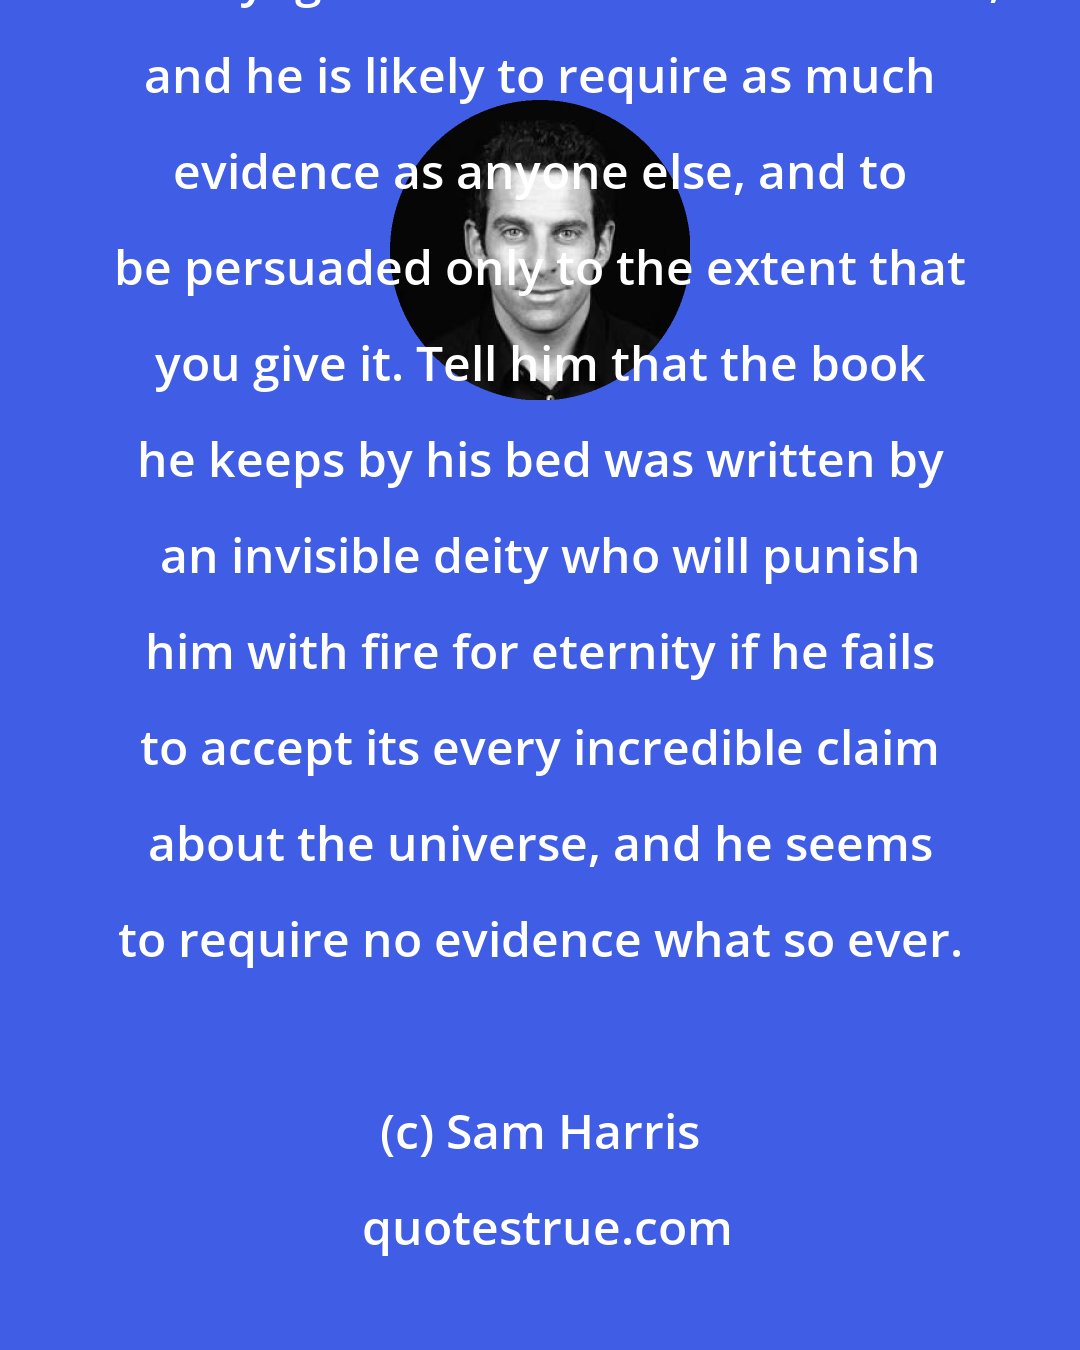 Sam Harris: Tell a devout Christian that his wife is cheating on him, or that frozen yogurt can make a man invisible, and he is likely to require as much evidence as anyone else, and to be persuaded only to the extent that you give it. Tell him that the book he keeps by his bed was written by an invisible deity who will punish him with fire for eternity if he fails to accept its every incredible claim about the universe, and he seems to require no evidence what so ever.